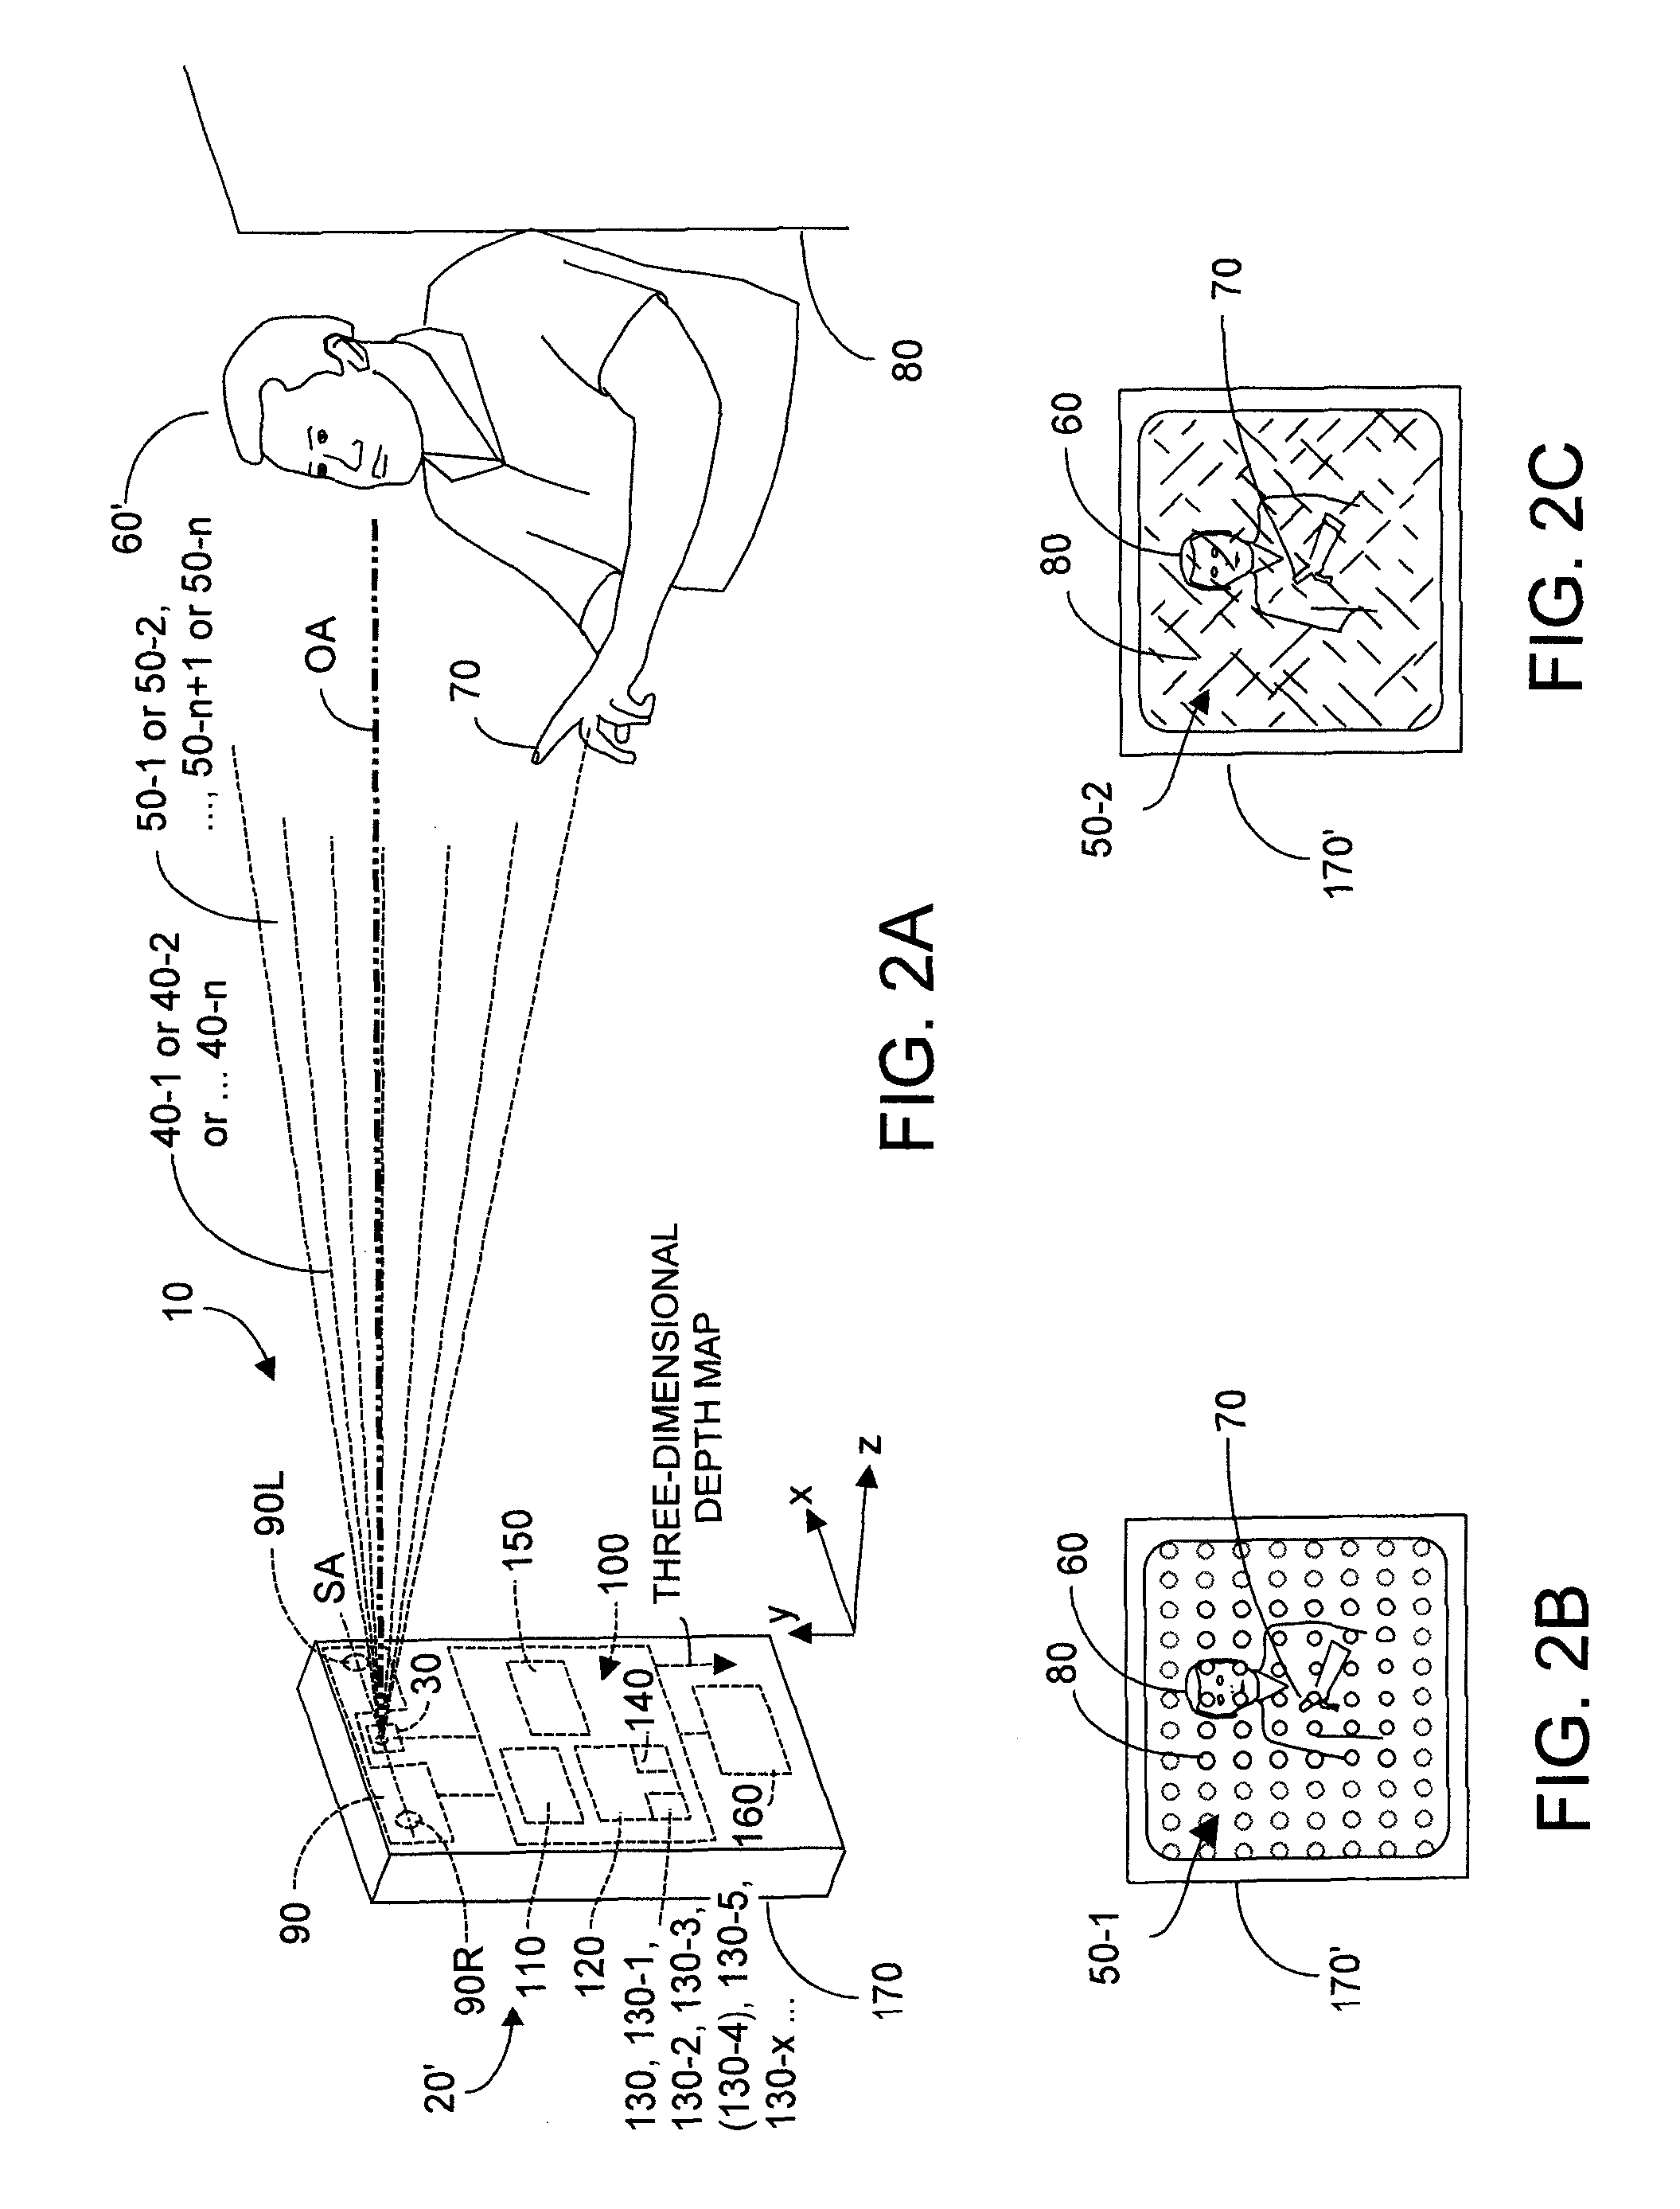 Dynamically reconfigurable optical pattern generator module useable with a system to rapidly reconstruct three-dimensional data